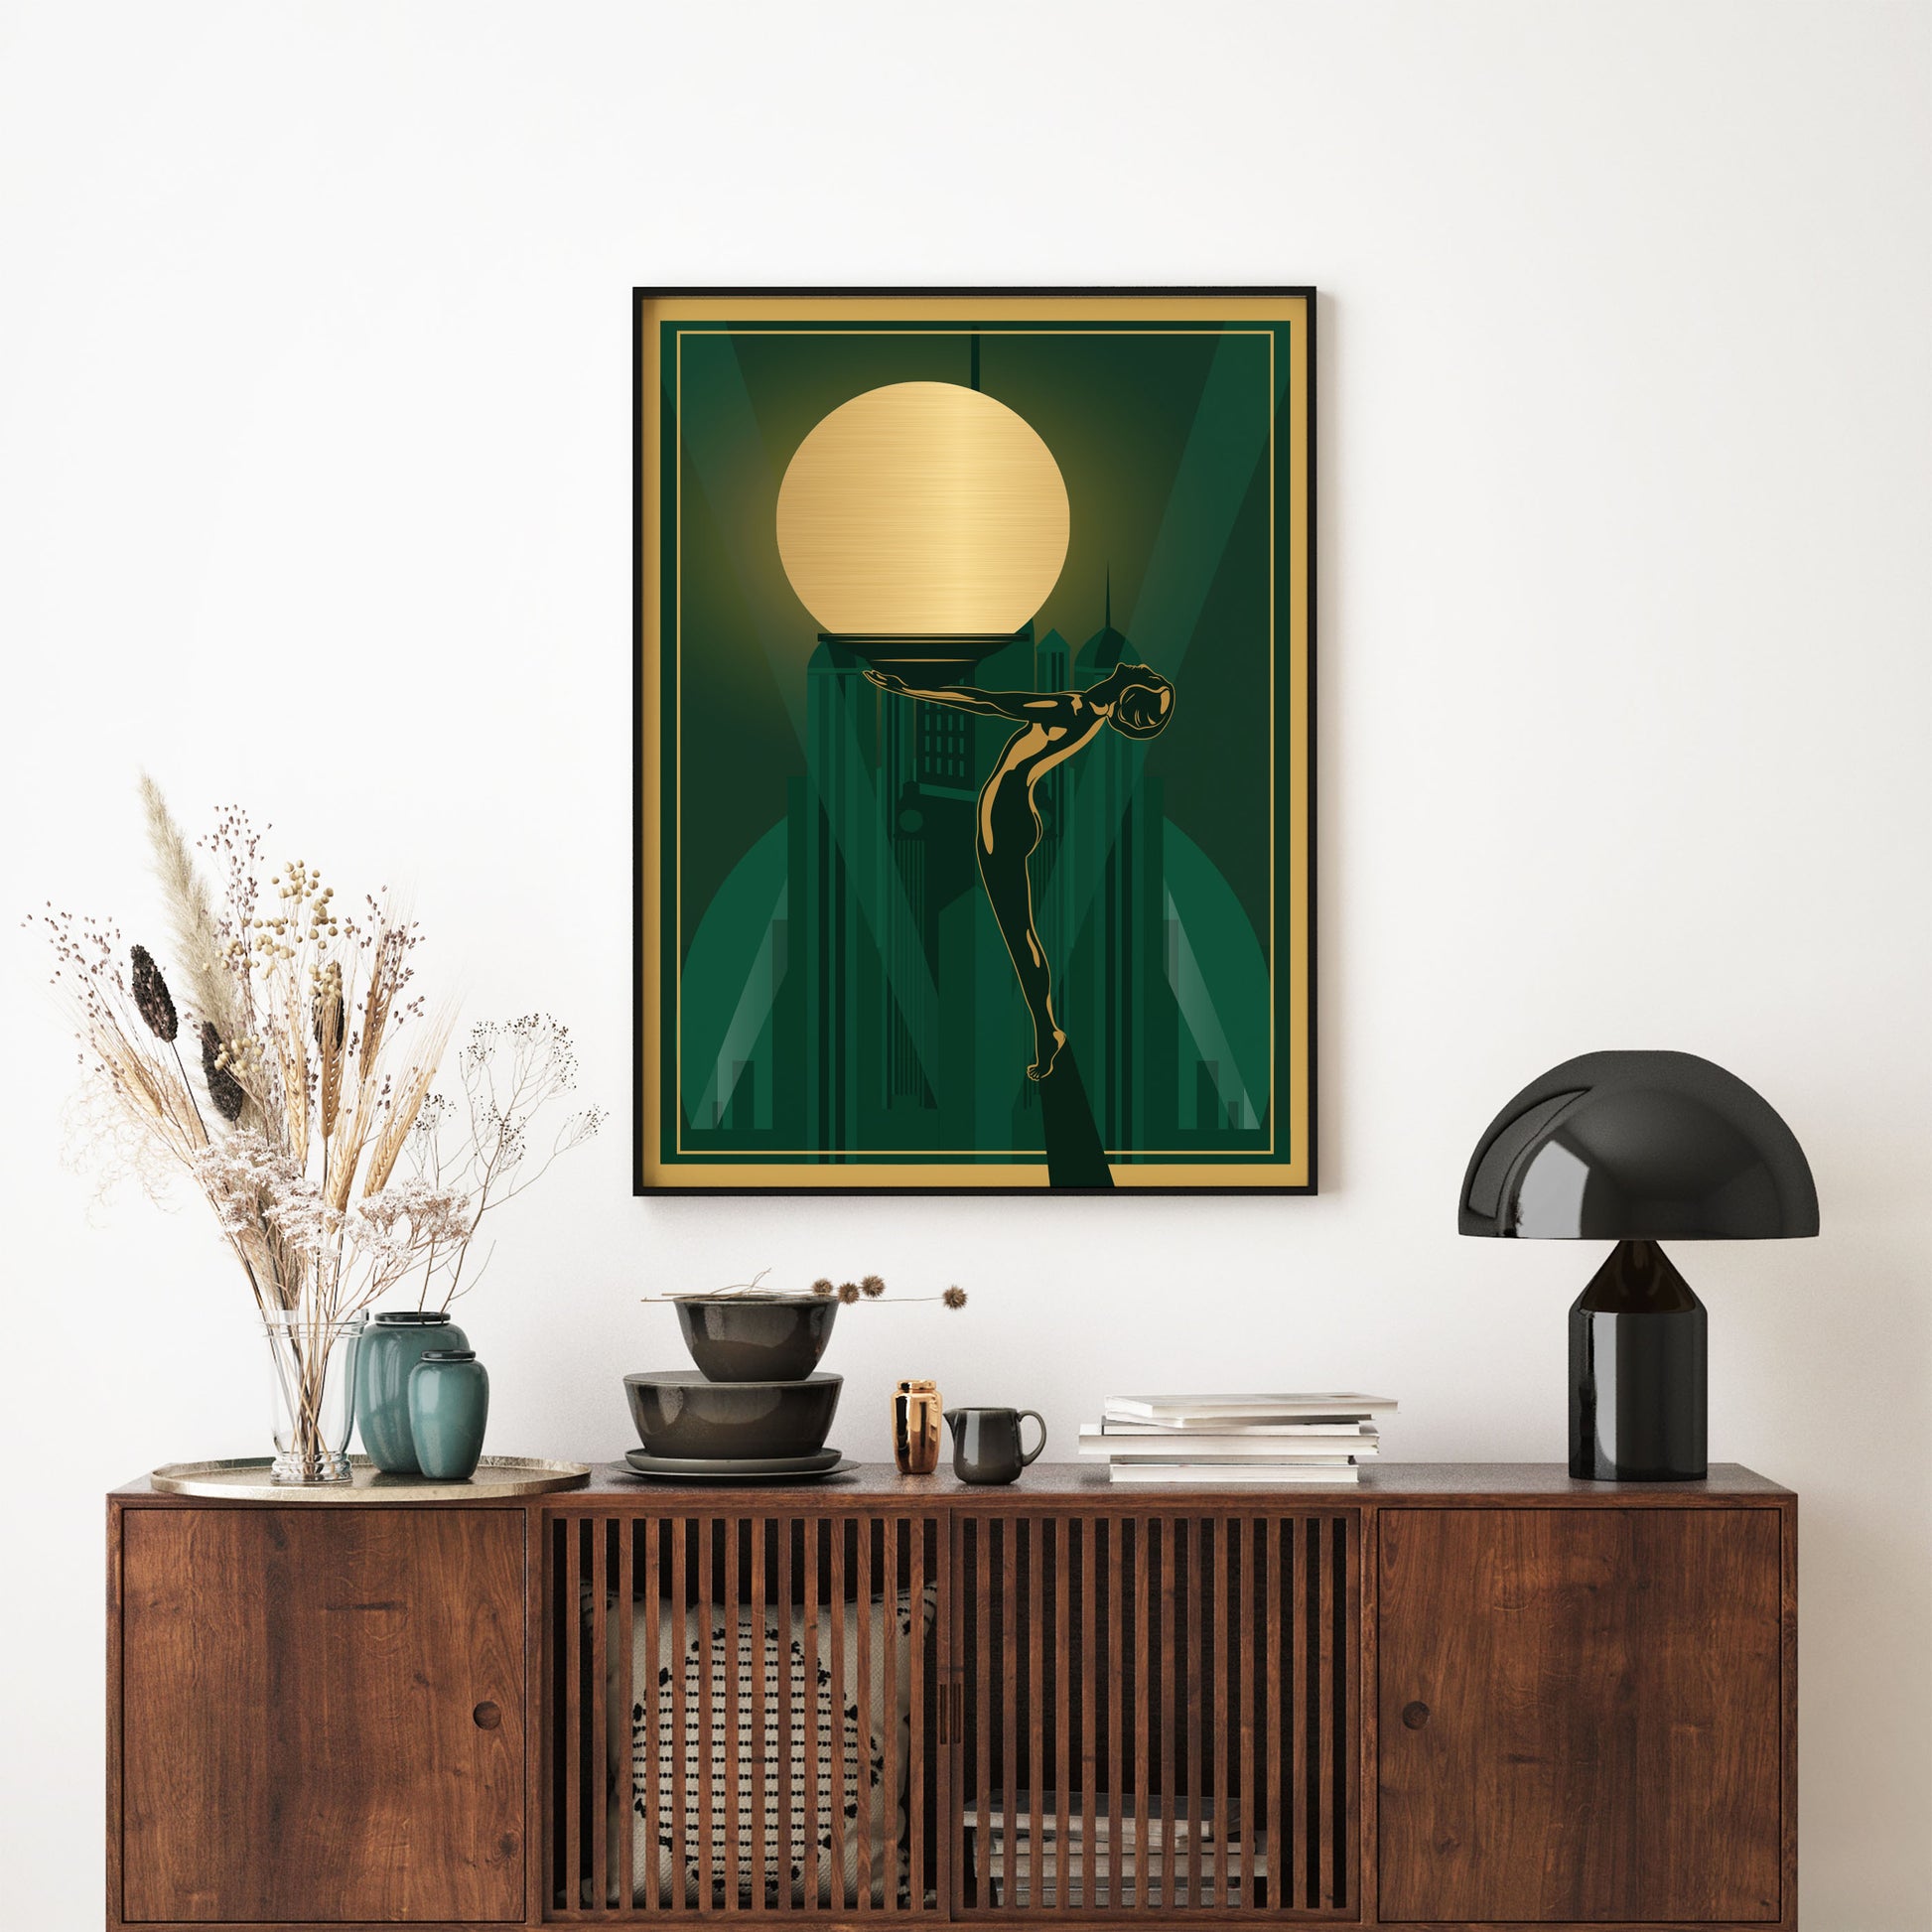 Art deco poster in green and gold